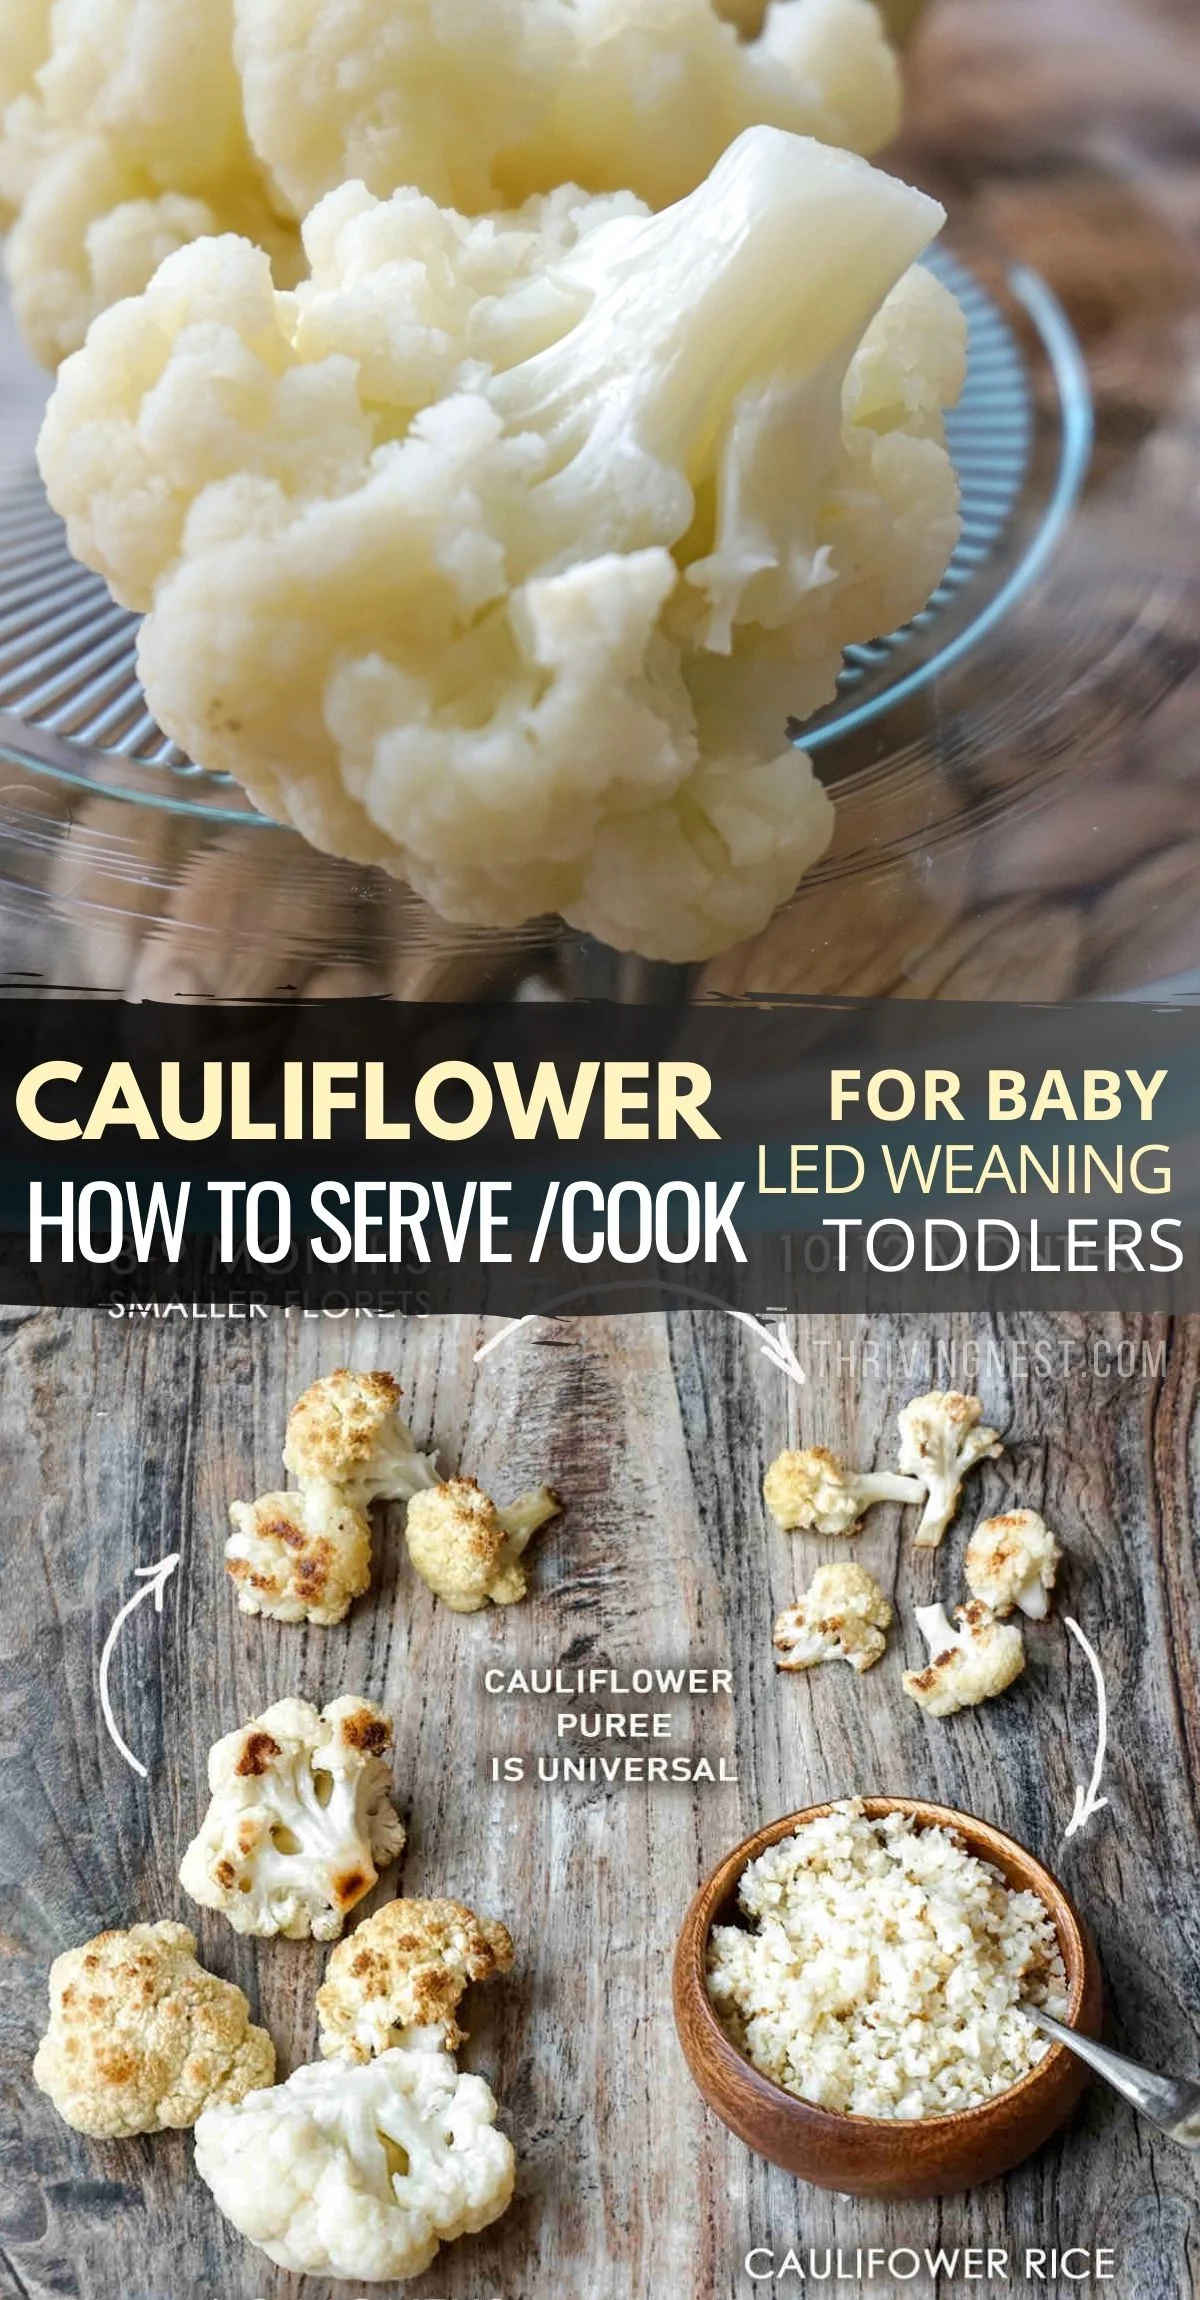 Learn how to cook, cut and serve cauliflower for baby and baby led weaning method. Whether it’s steamed, puréed, mashed, grated or roasted, it makes a nutritious baby food for babies starting around 7-8 months or toddlers / older kids. Make a large variety of cauliflower baby puree combinations with different textures or finger foods adjusted by age. #babyledweaning #blw #cauliflower #cauliflowerbabyfood #babyfood #recipe #babyledfeeding #cauliflowerpuree #cauliflowerforbaby